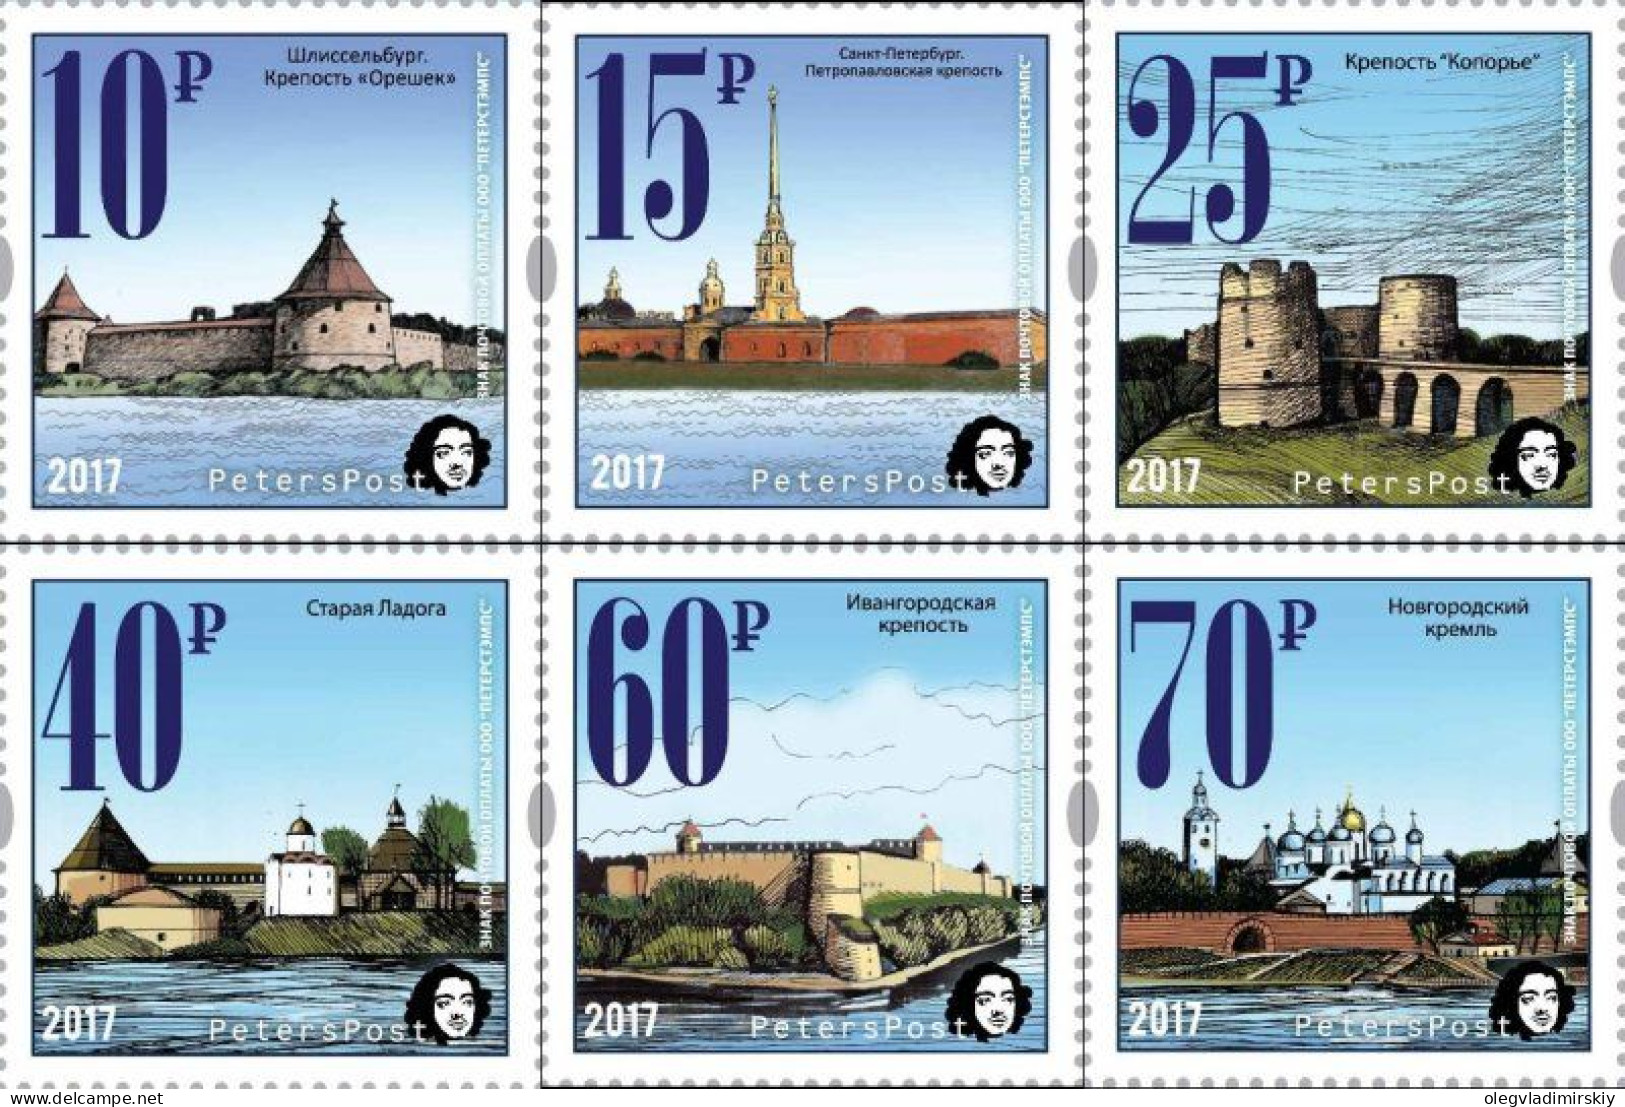 Russia 2017 Definitives Castles And Fortress 2nd Issue Peterspost Set Of 6 Stamps MNH - Castelli